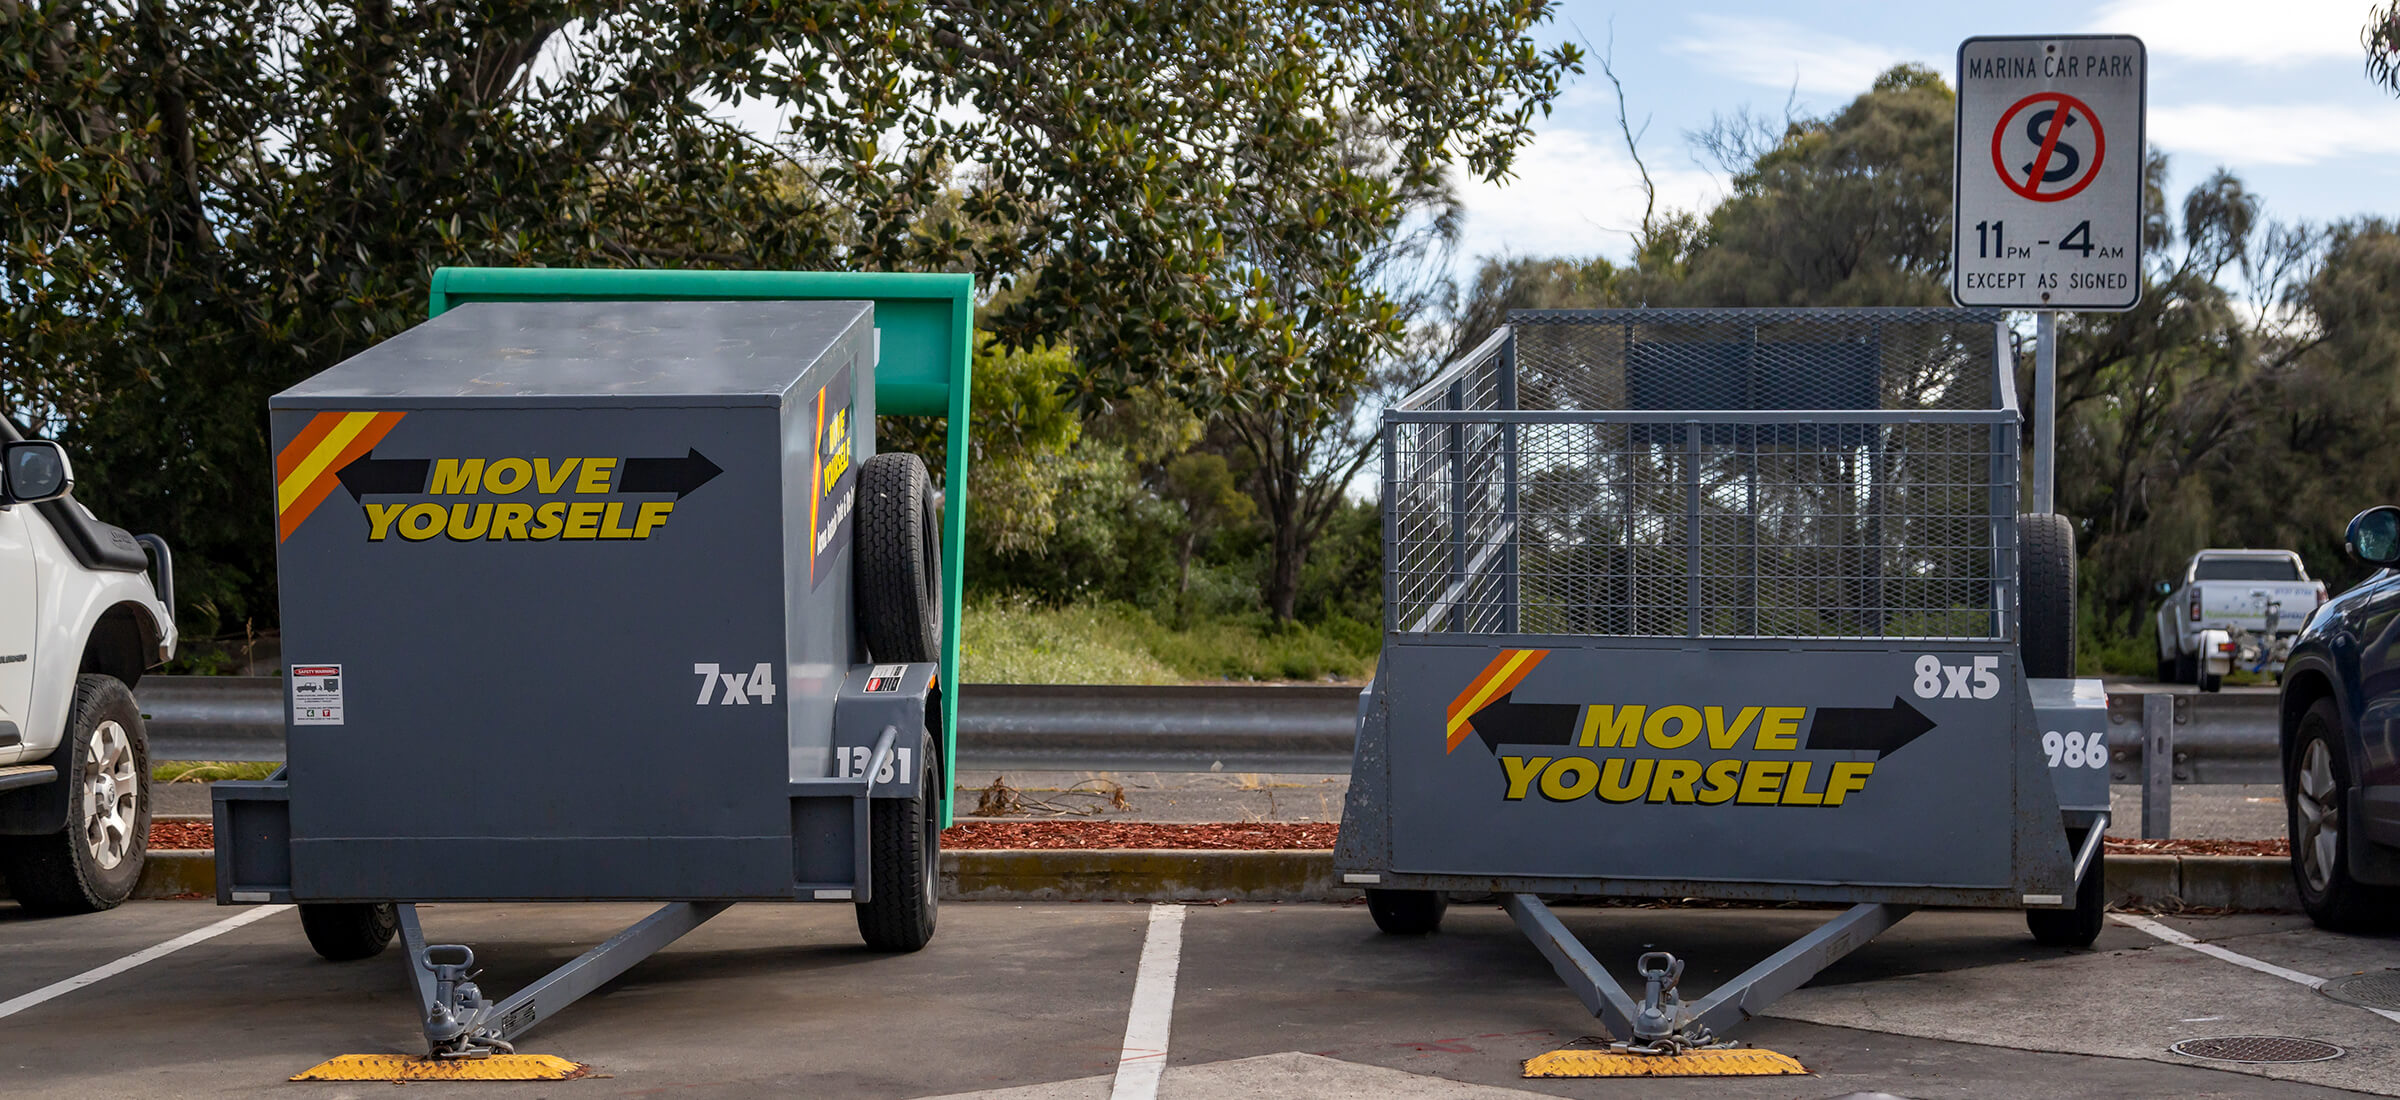 Move Yourself Trailer Hire - Built in Australia, our trailers give a smooth towing experience designed for tough Aussie roads